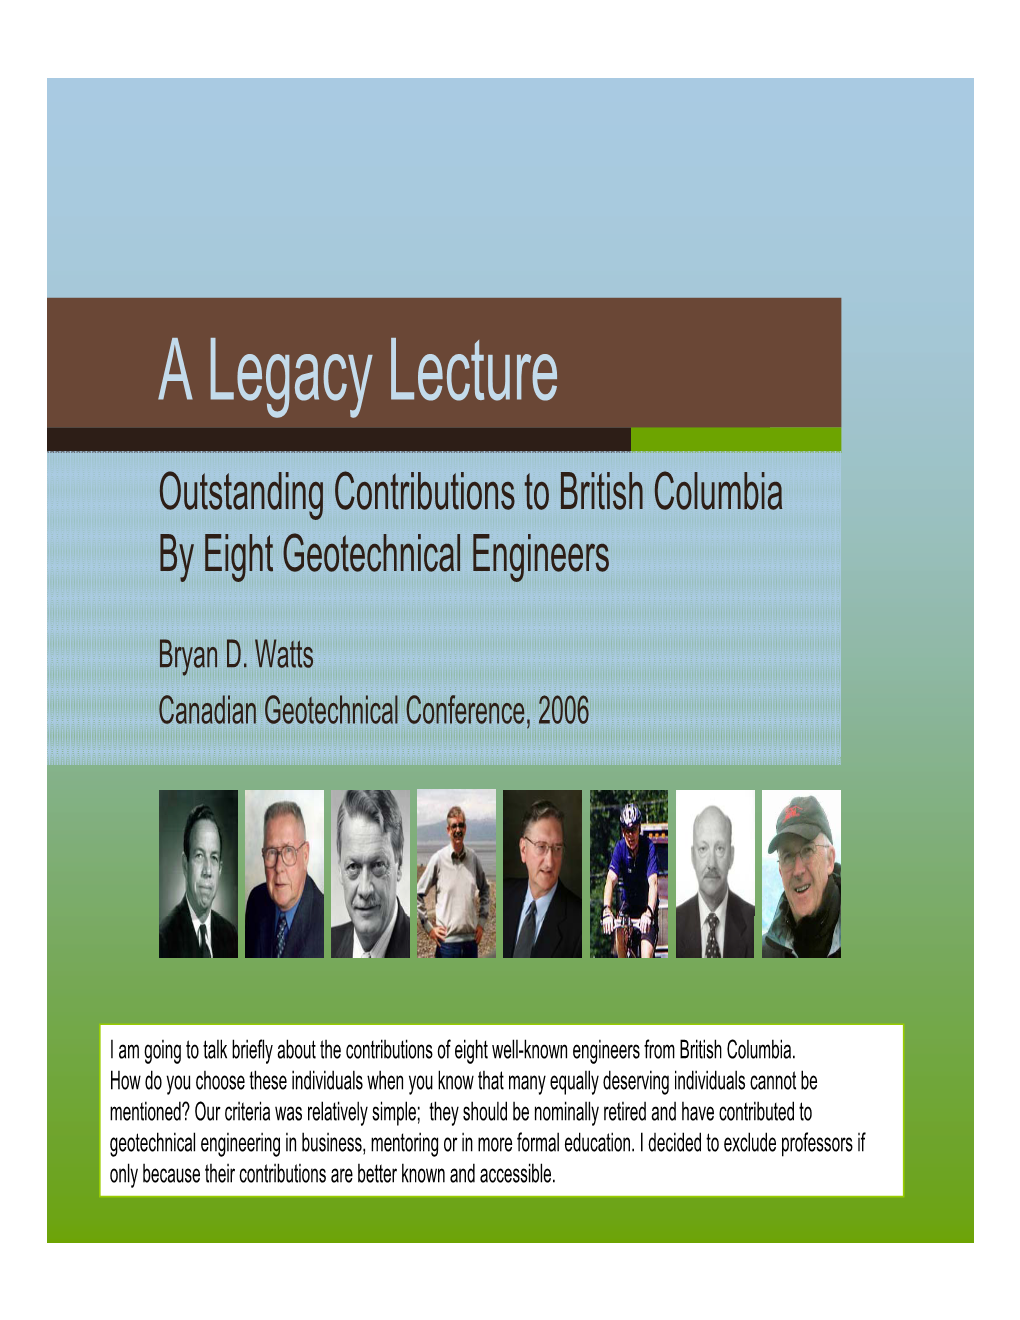 A Legacy Lecture Outstanding Contributions to British Columbia by Eight Geotechnical Engineers